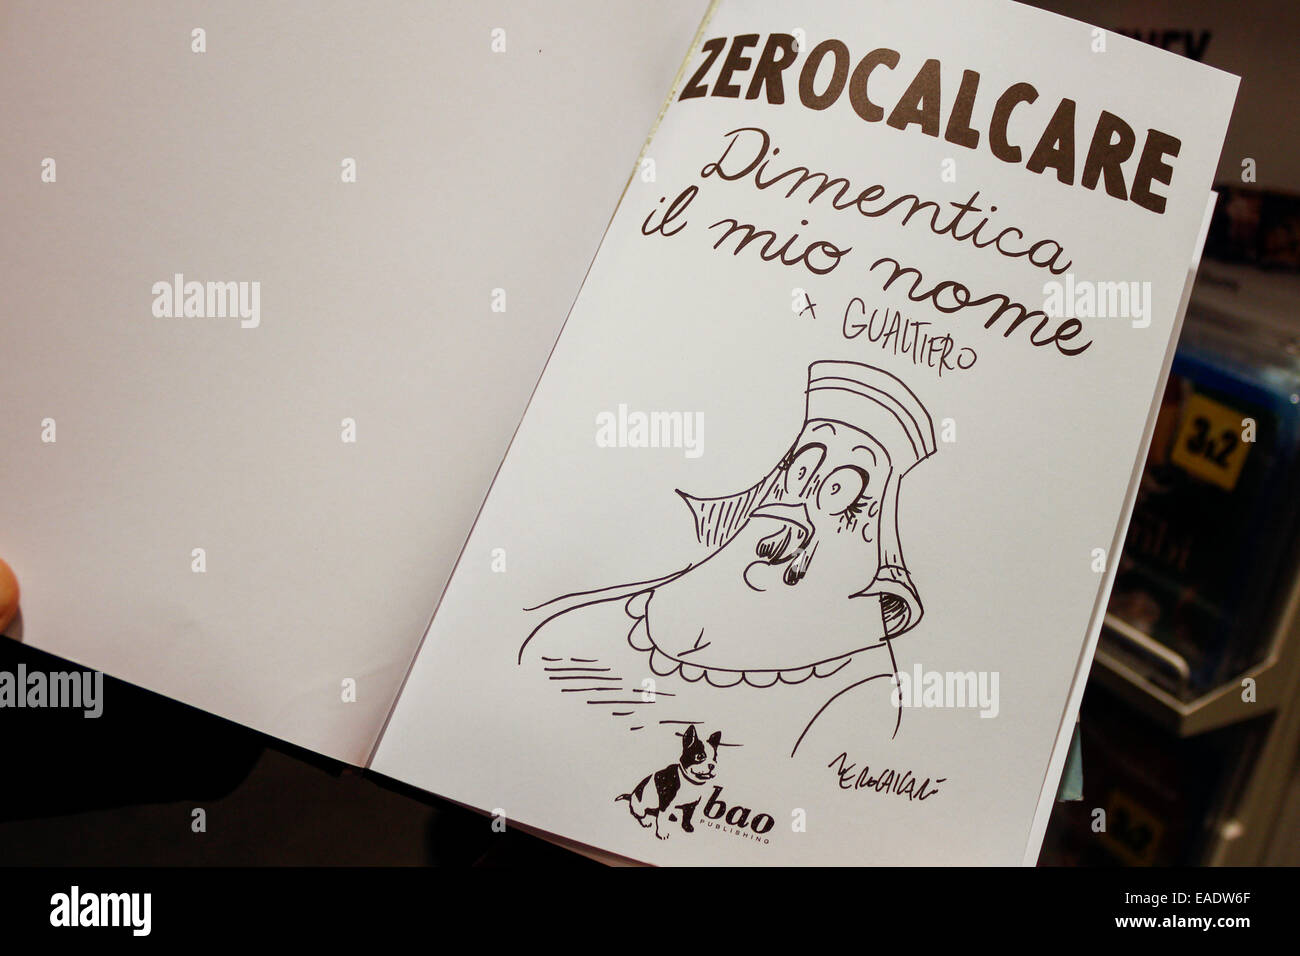 The autograph with a drawing of Zerocalcare. Zerocalcare (aka Michele Rech), the Italian cartoonist most followed at the moment, met his fans at the Feltrinelli library for autographs with a drawing his latest work 'Dimentica il mio nome'. © Elena Aquila/Pacific Press/Alamy Live News Stock Photo